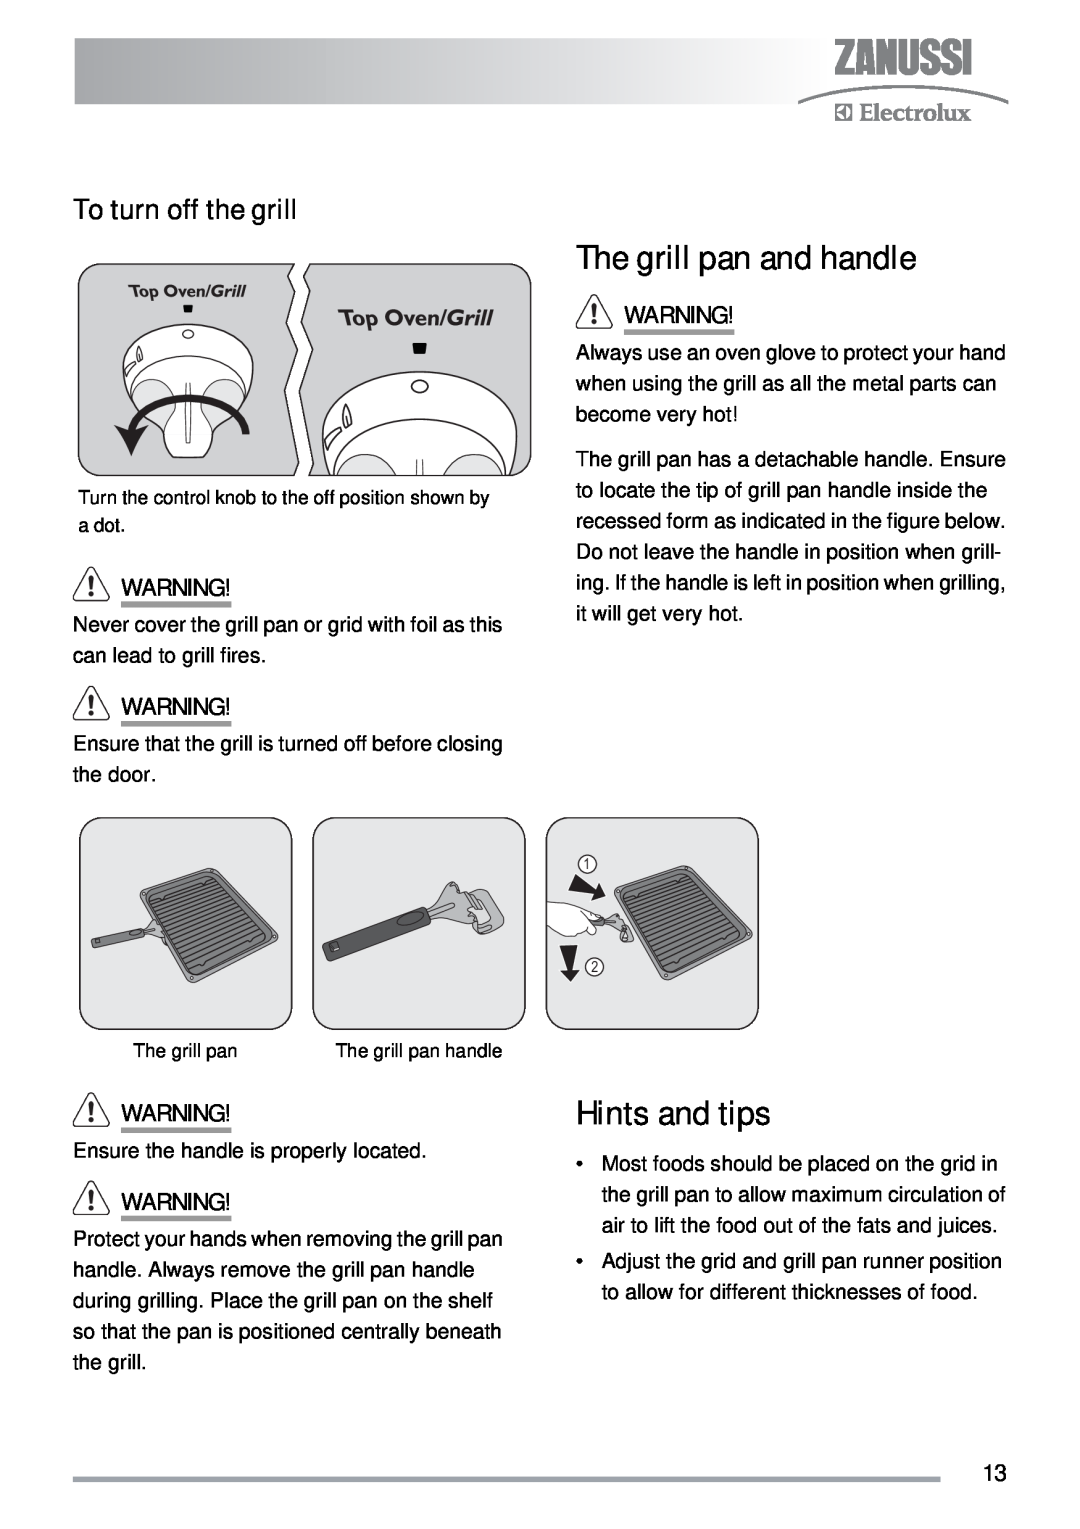 Zanussi ZKG5030 manual The grill pan and handle, To turn off the grill, Hints and tips 